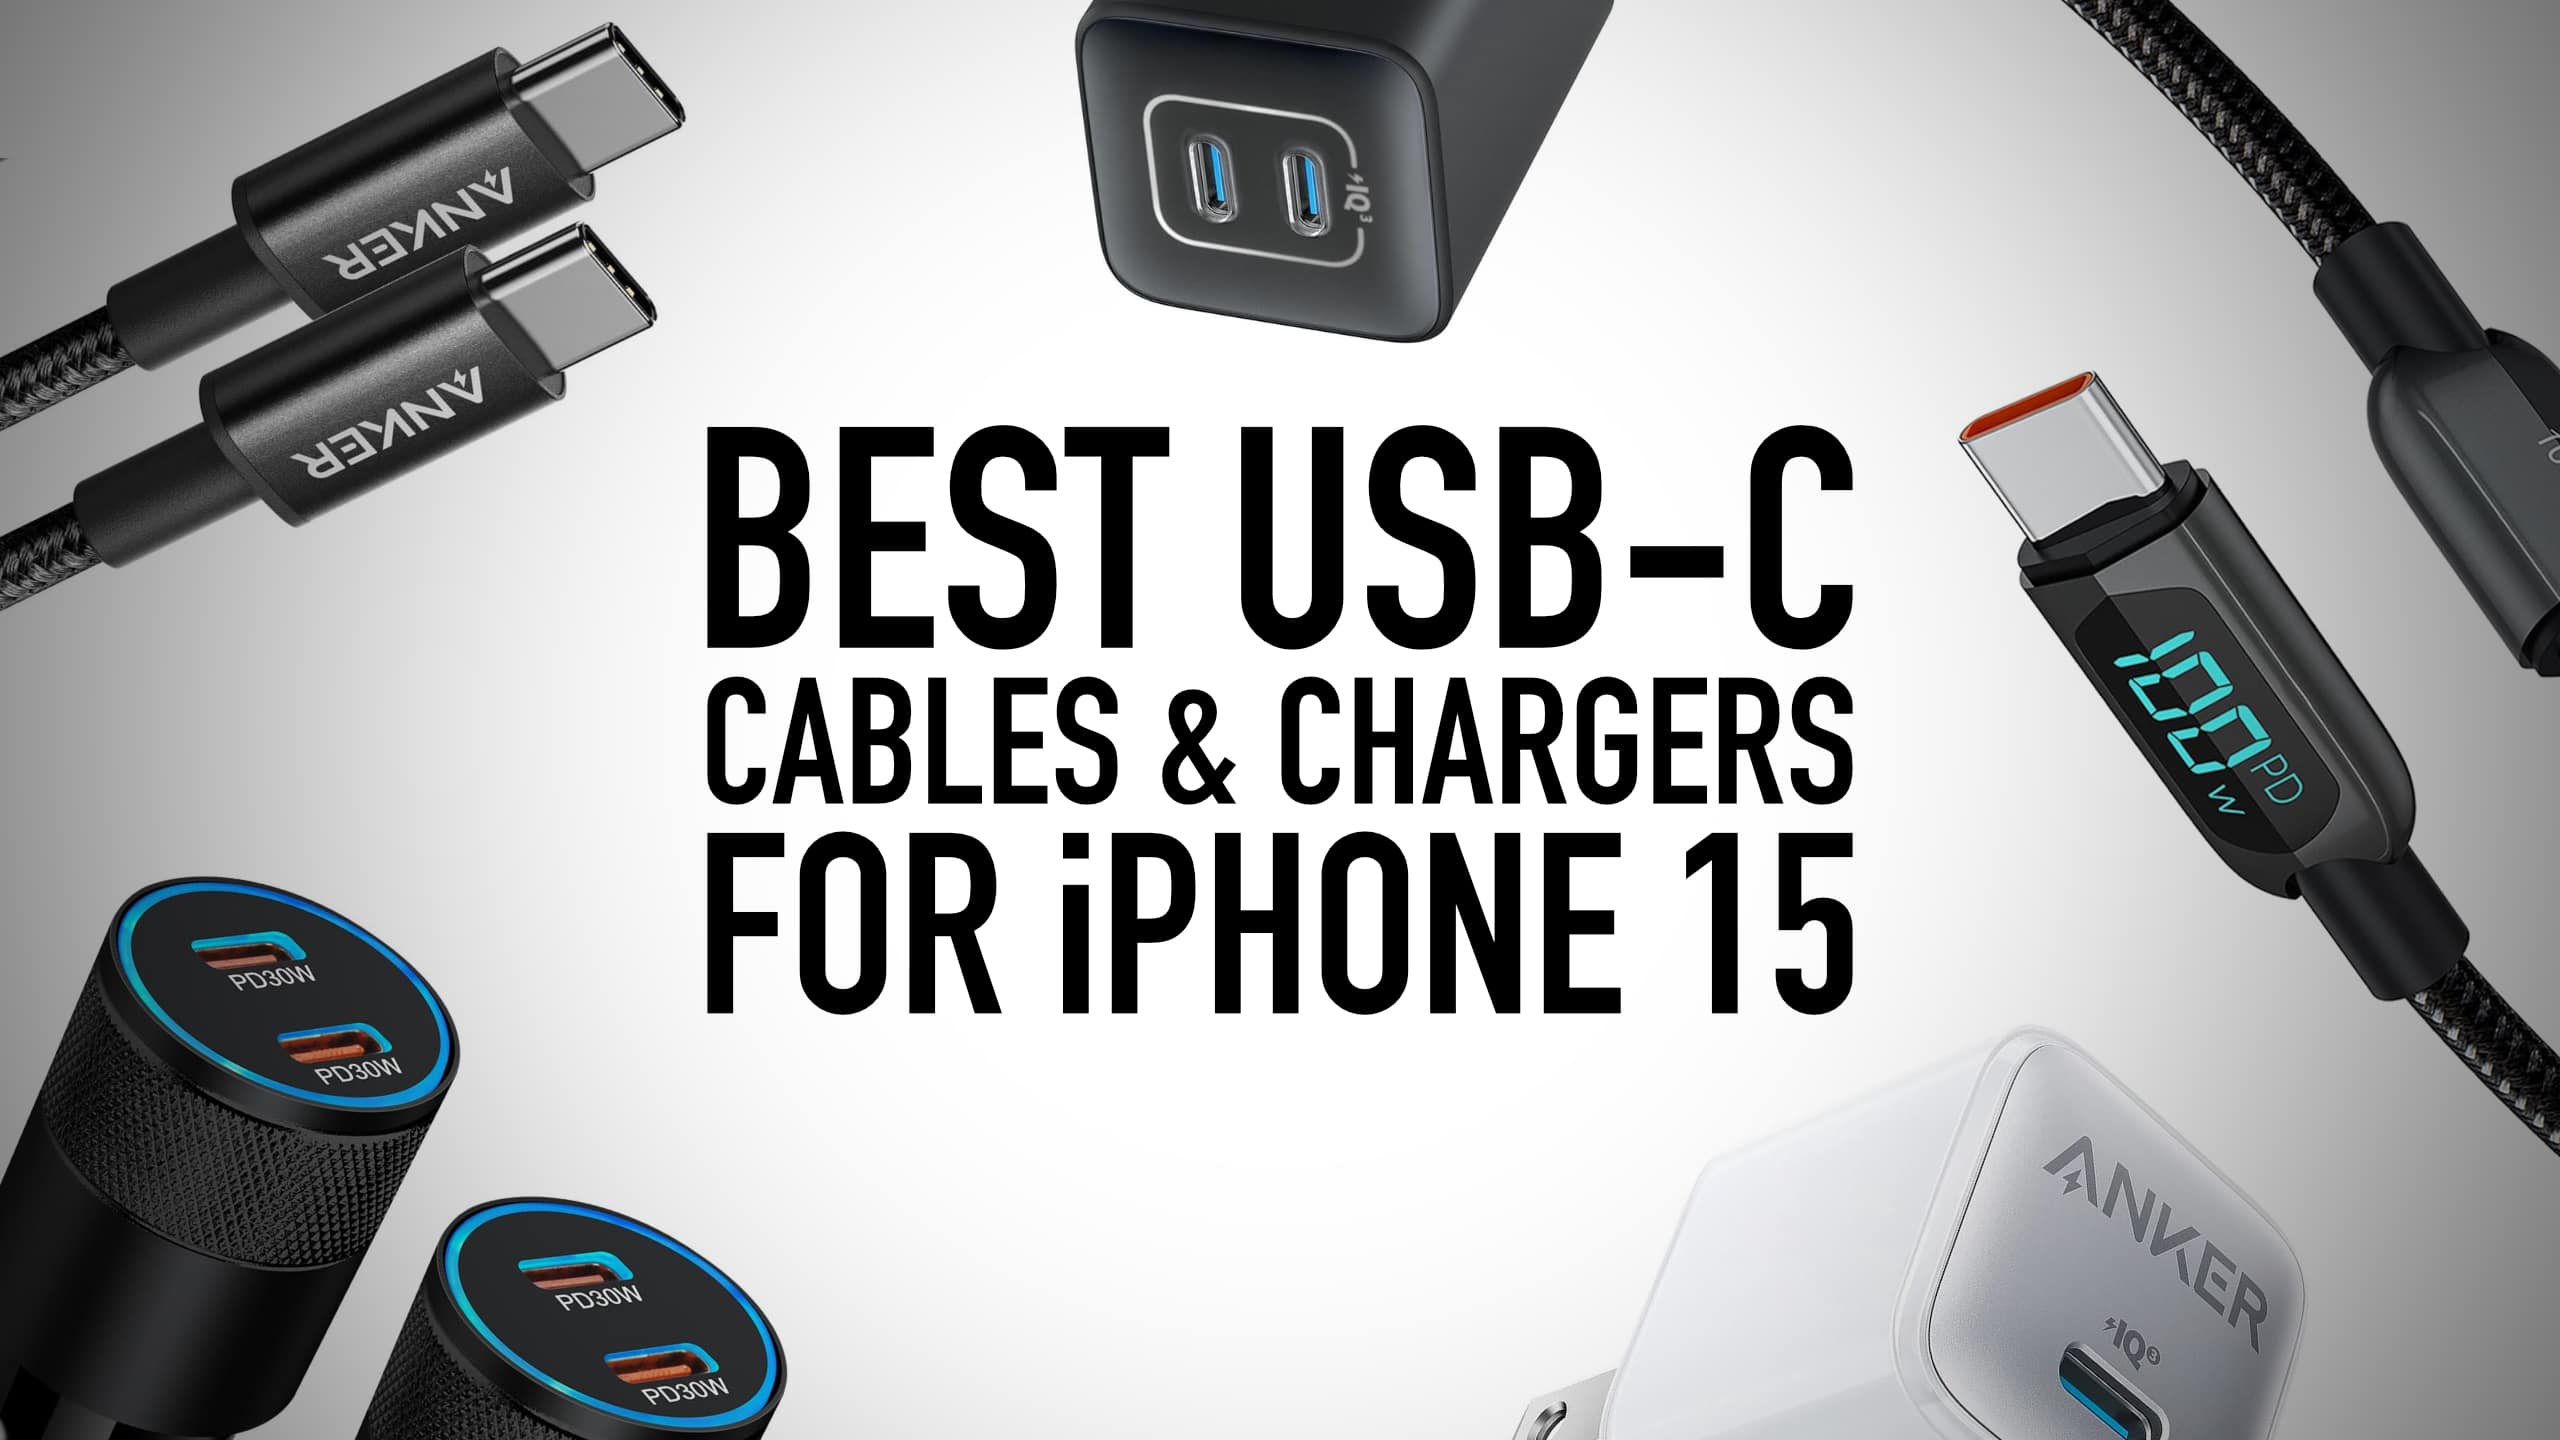 Best USB-C With USB 3 Cables For iPhone 15 Pro That Offer 10GB/s Transfers  - iOS Hacker